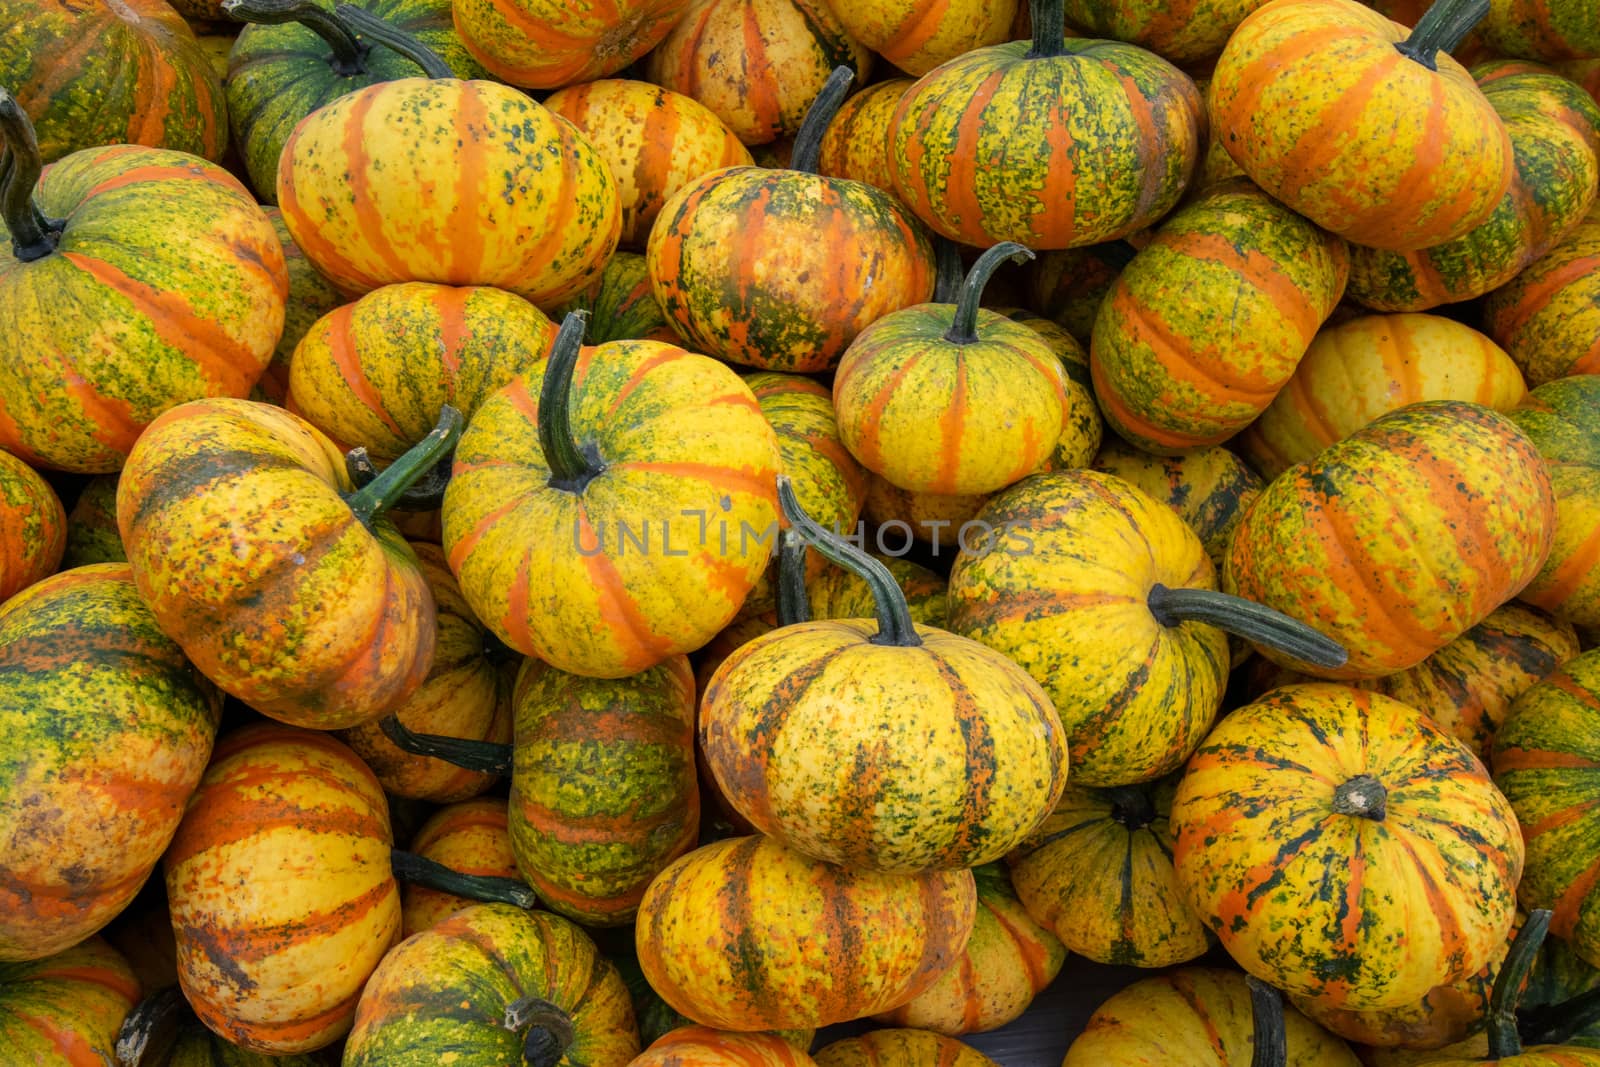 A Pile of Small Yellow Striped Pumpkins in a Box at a Farmer's Market Filling the Frame